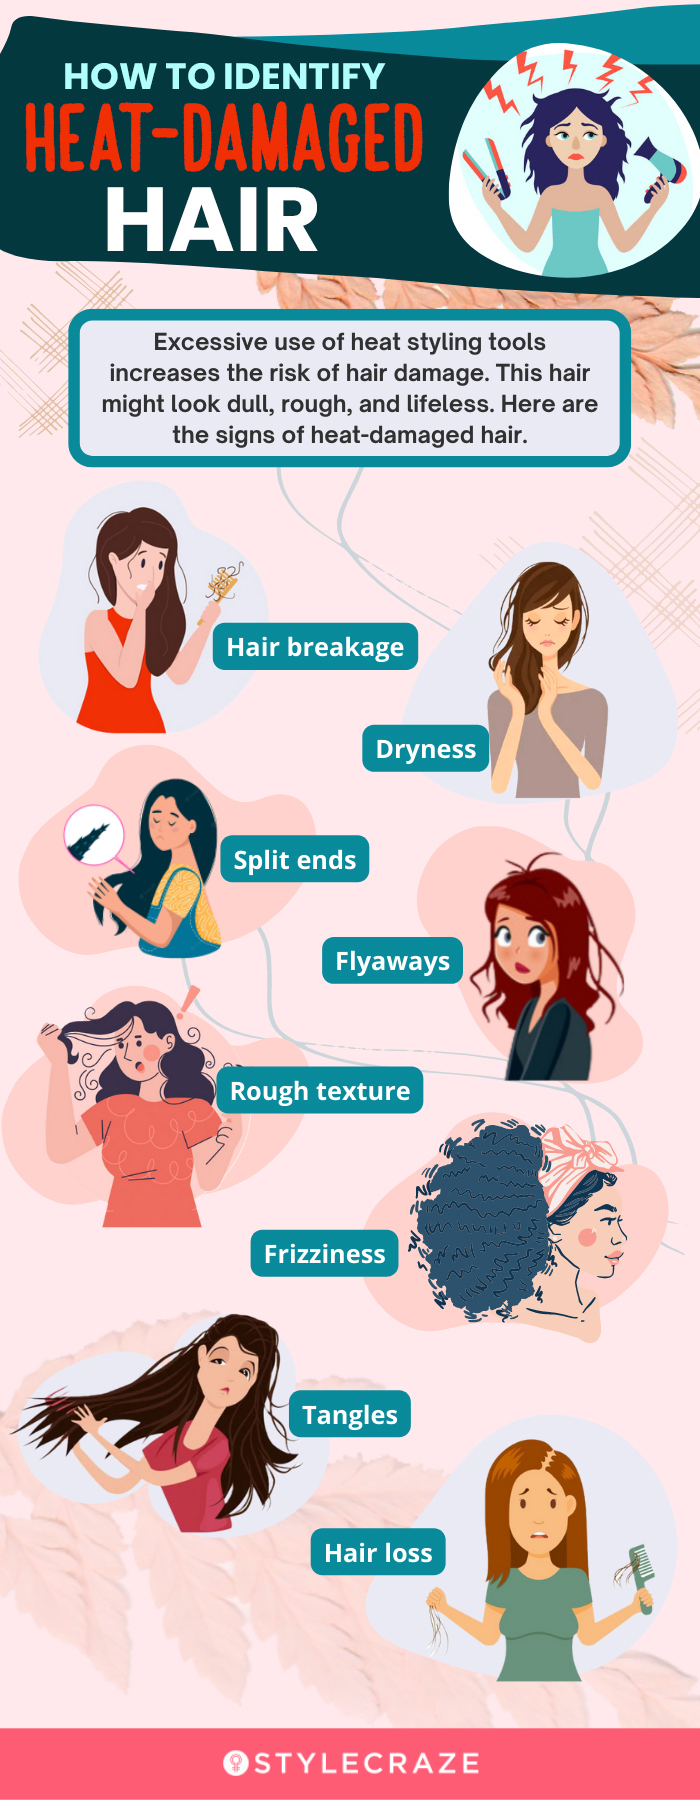 how to identify heat damaged hair [infographic]